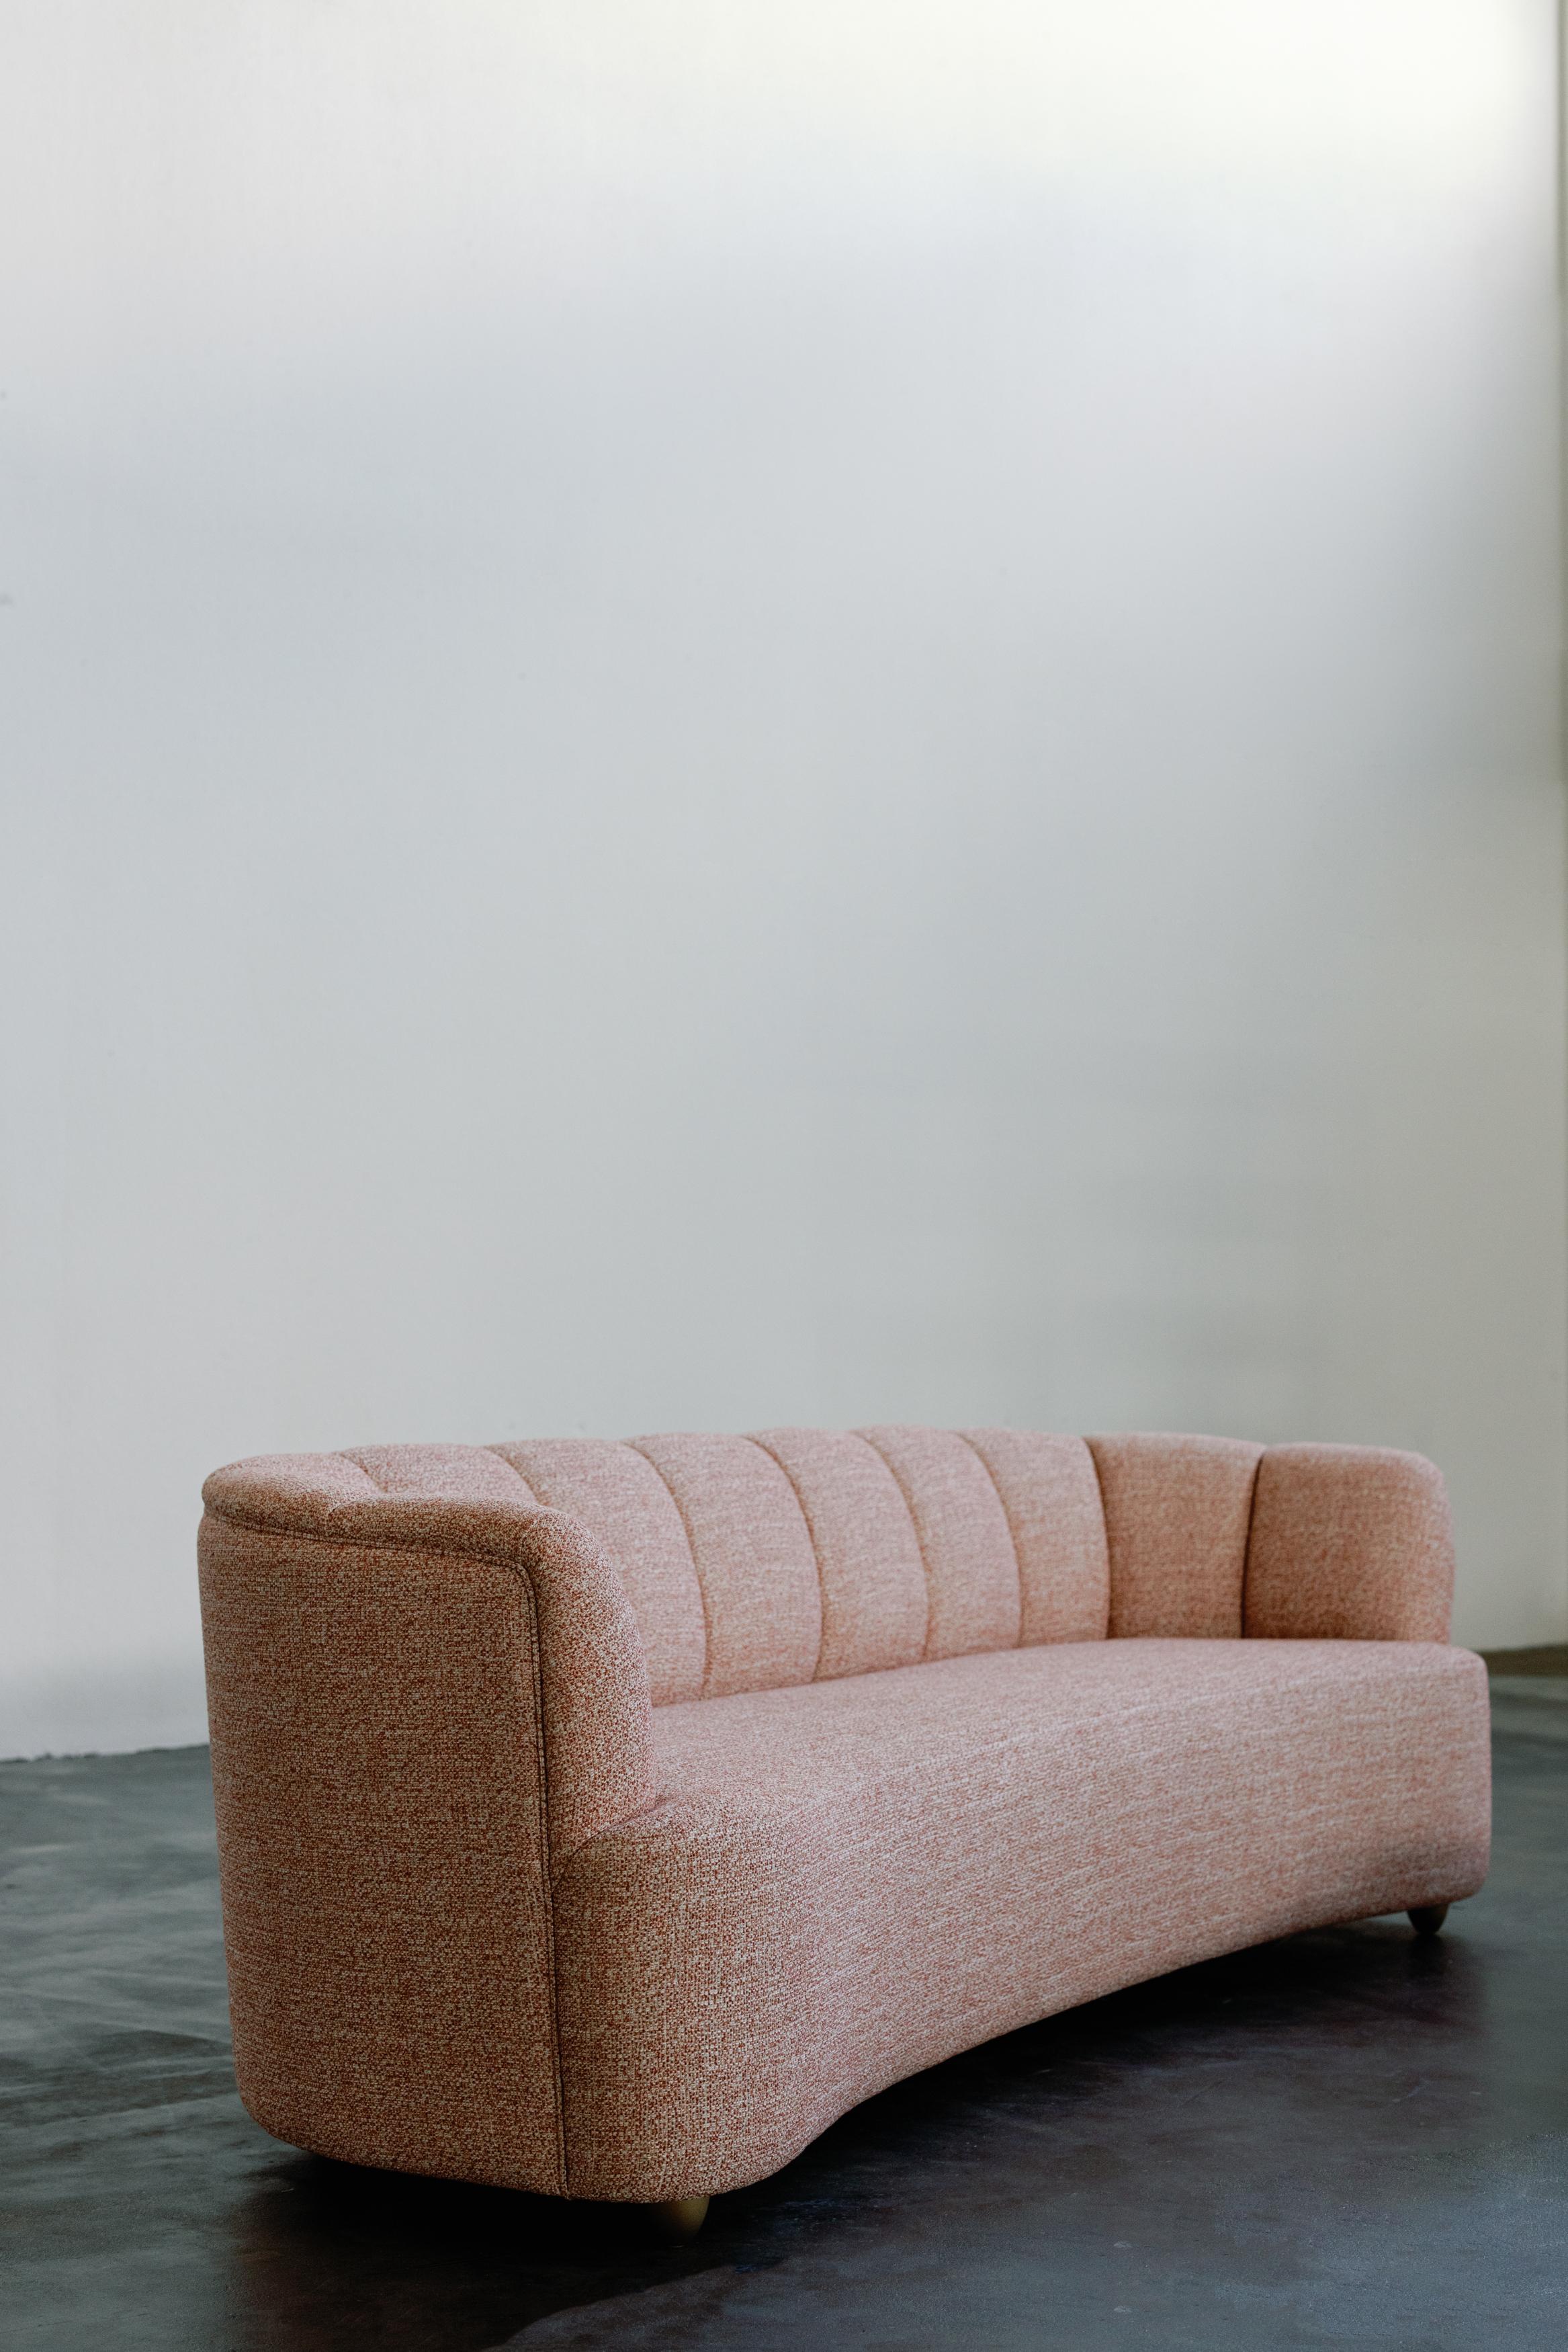 Lisboa sofa, Modern Collection, Handcrafted in Portugal - Europe by Greenapple.

A masterfully crafted sofa whose robust wooden structure and high-quality memory foam retain their shape even with frequent use. Lisboa is upholstered in a Terracotta